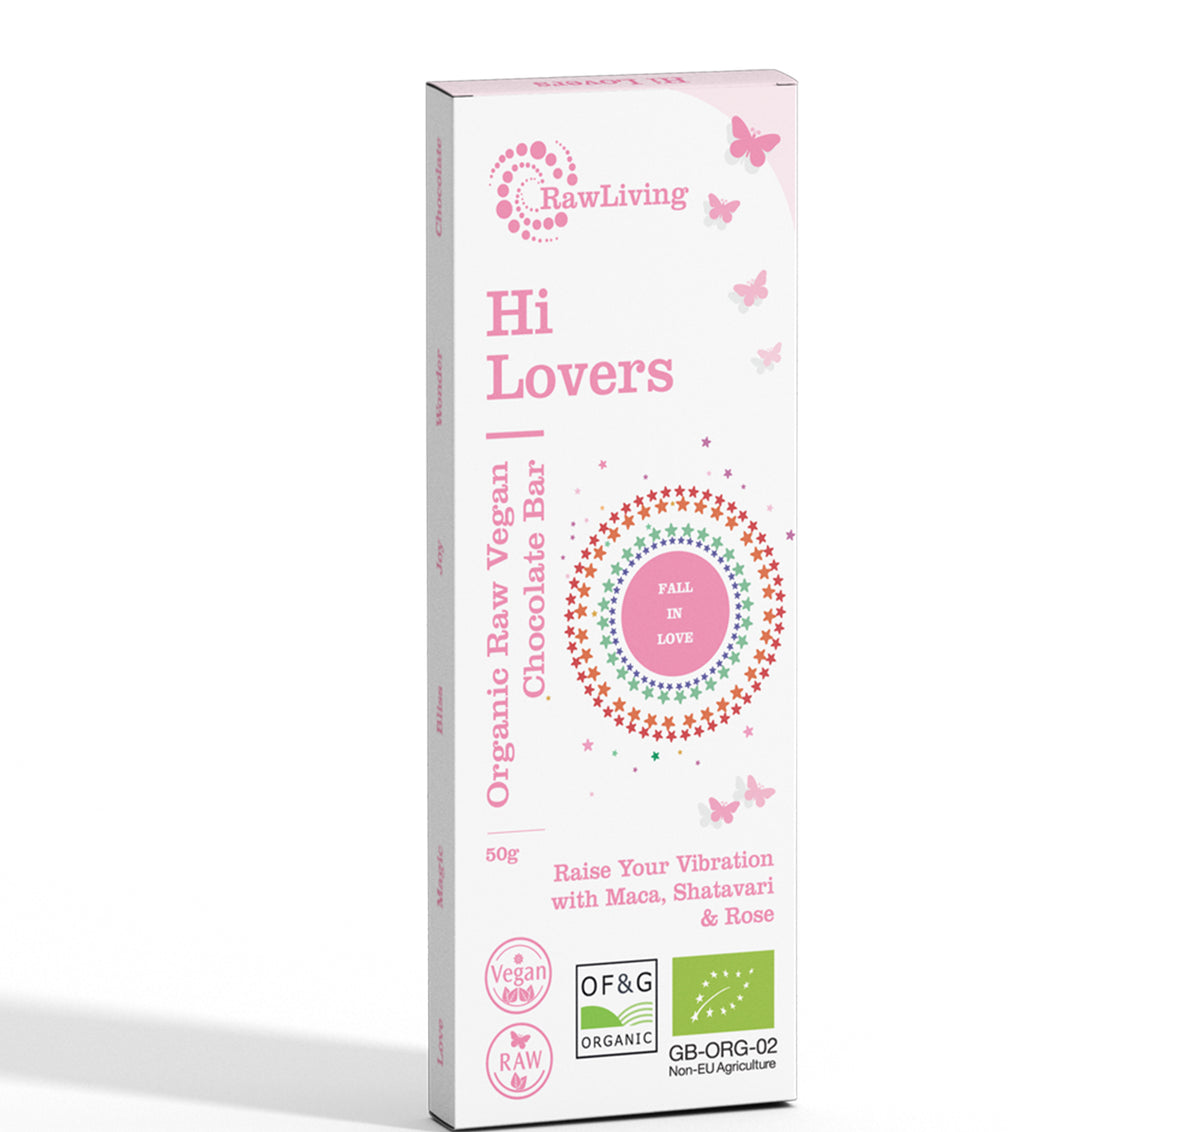 Hi-Lovers Chocolate Bar | Raw Living UK | Raw Chocolate | Raw Living Hi-Lovers Raw Chocolate Bar made with Raw Cacao, is a Vegan, Dairy-Free, Smooth Bar made with a hint of Maca, Shatavari &amp; Organic Rose Oil.